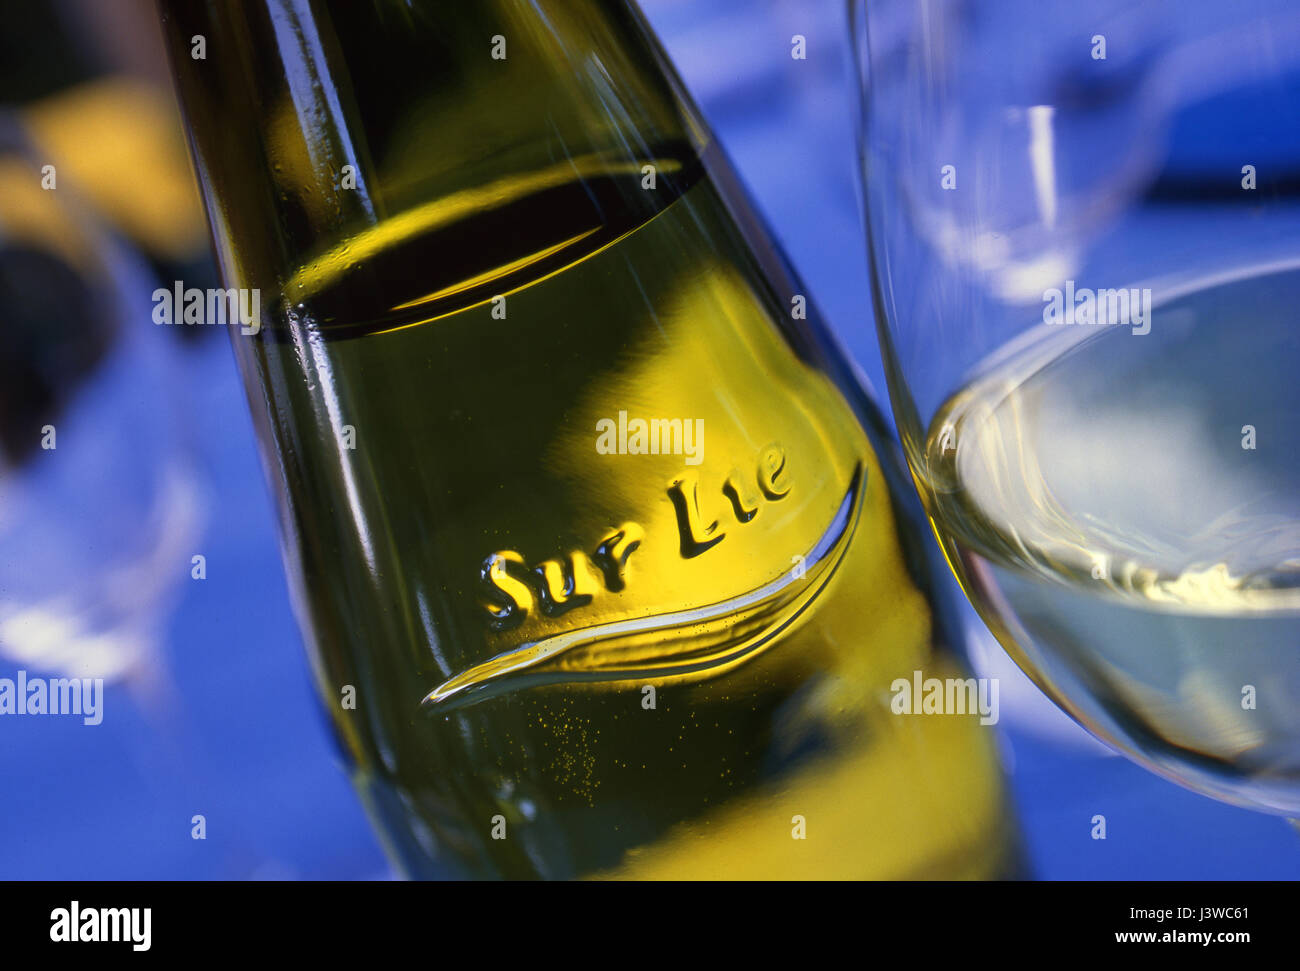 Muscadet Sur Lie view on wine bottle with relief label denoting 'Sur Lie' and poured glass of dry French dry white wine on alfresco blue table Stock Photo